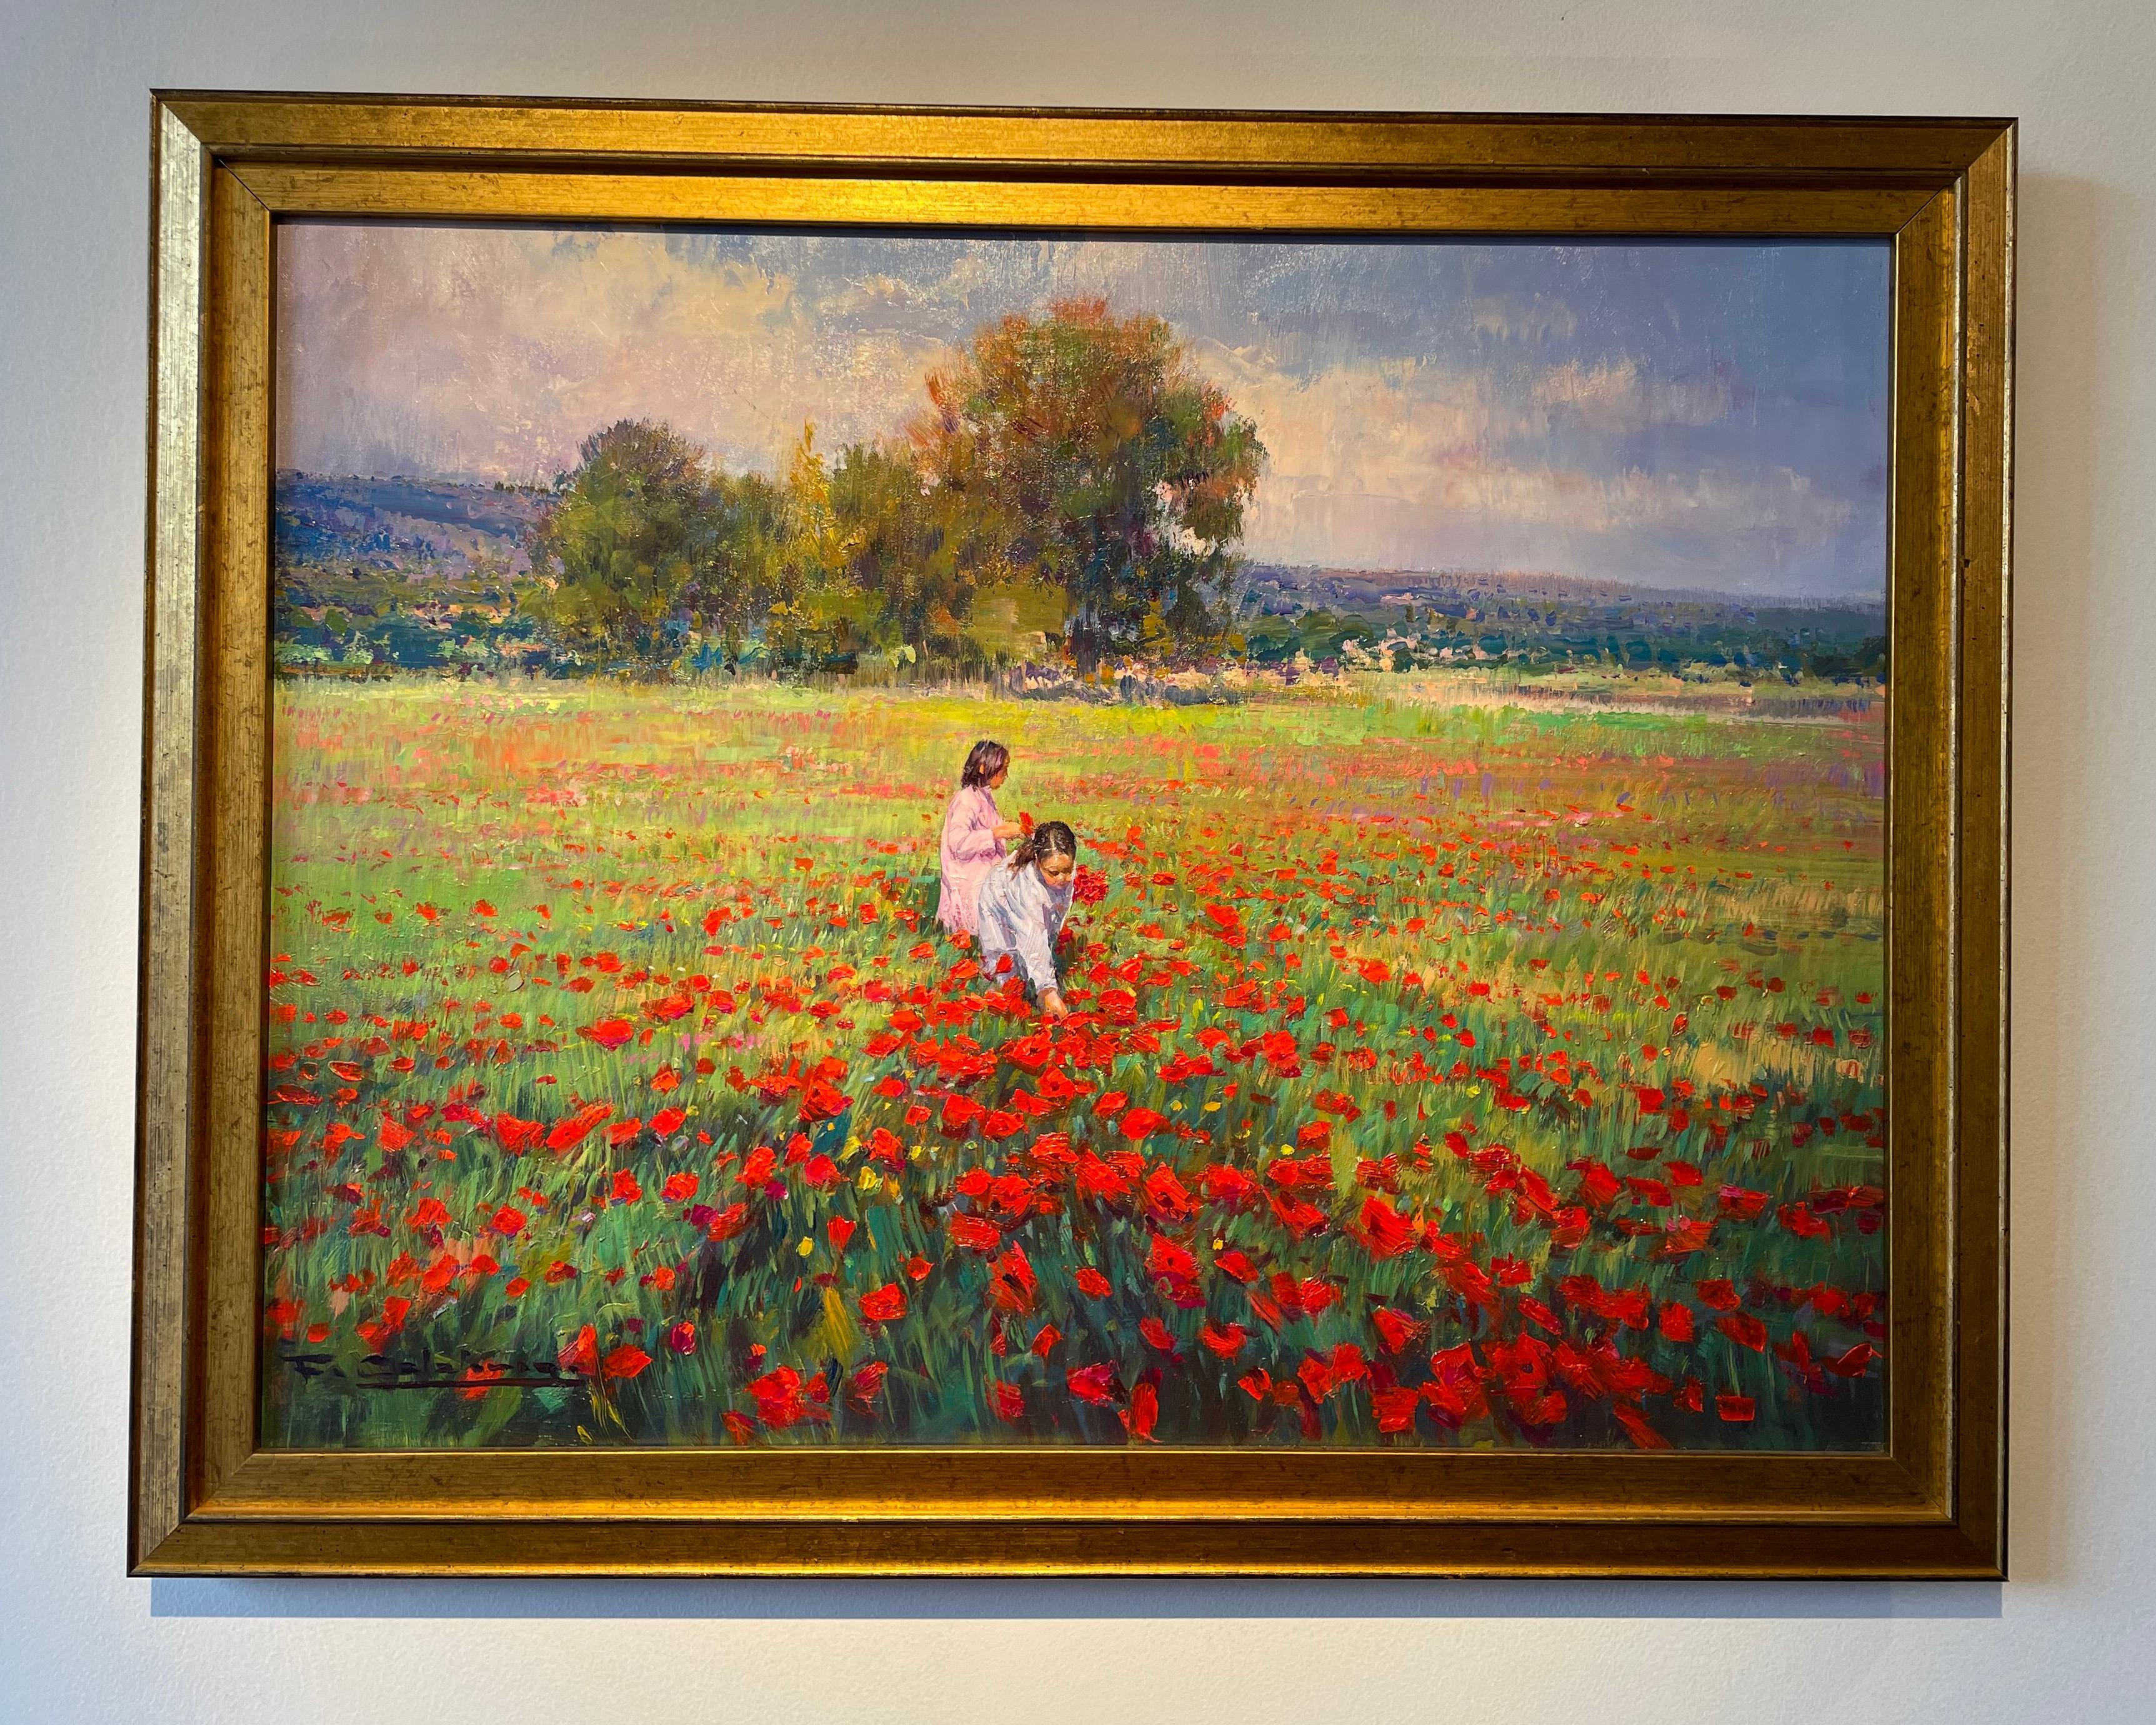 Francisco Calabuig Figurative Painting - 'Picking Poppies' Contemporary landscape painting with two figures, red, green 